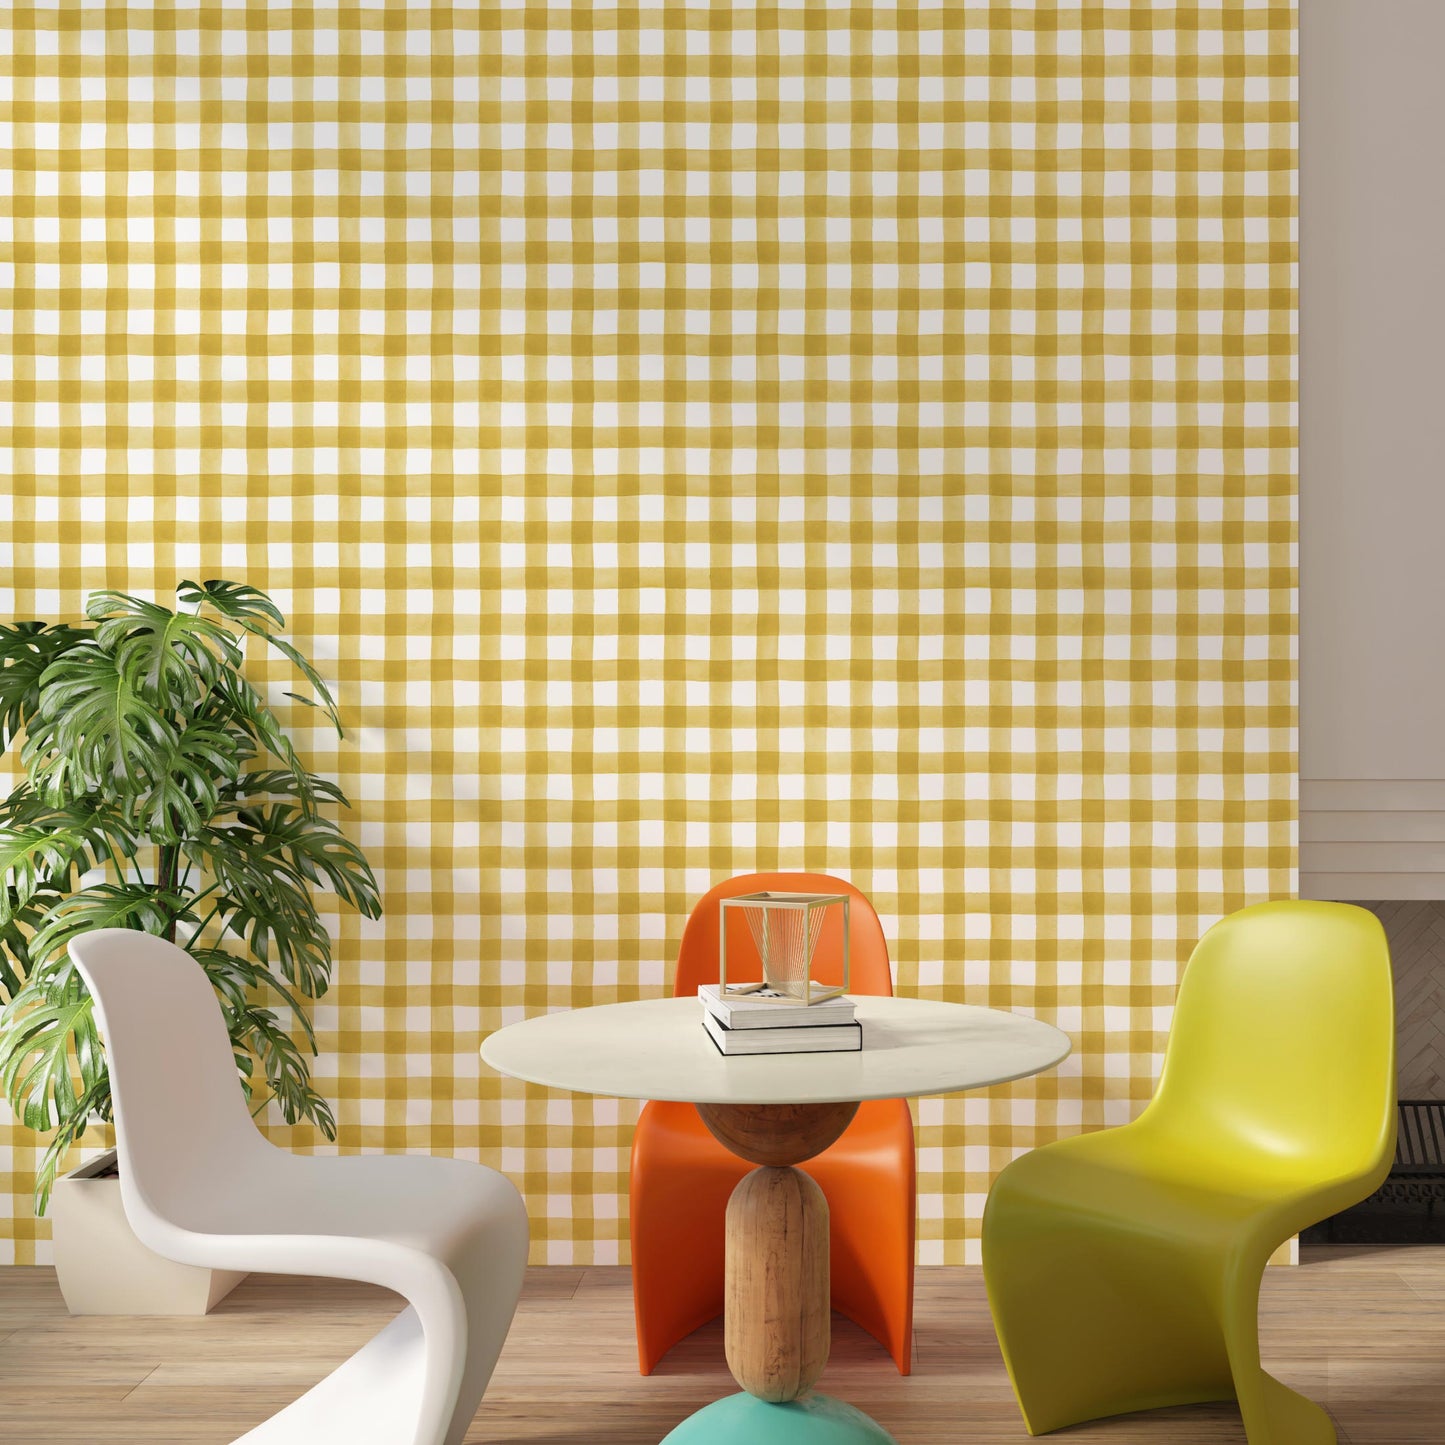 Transform Your Walls with Mustard Yellow Gingham Check Peel and Stick Wallpaper